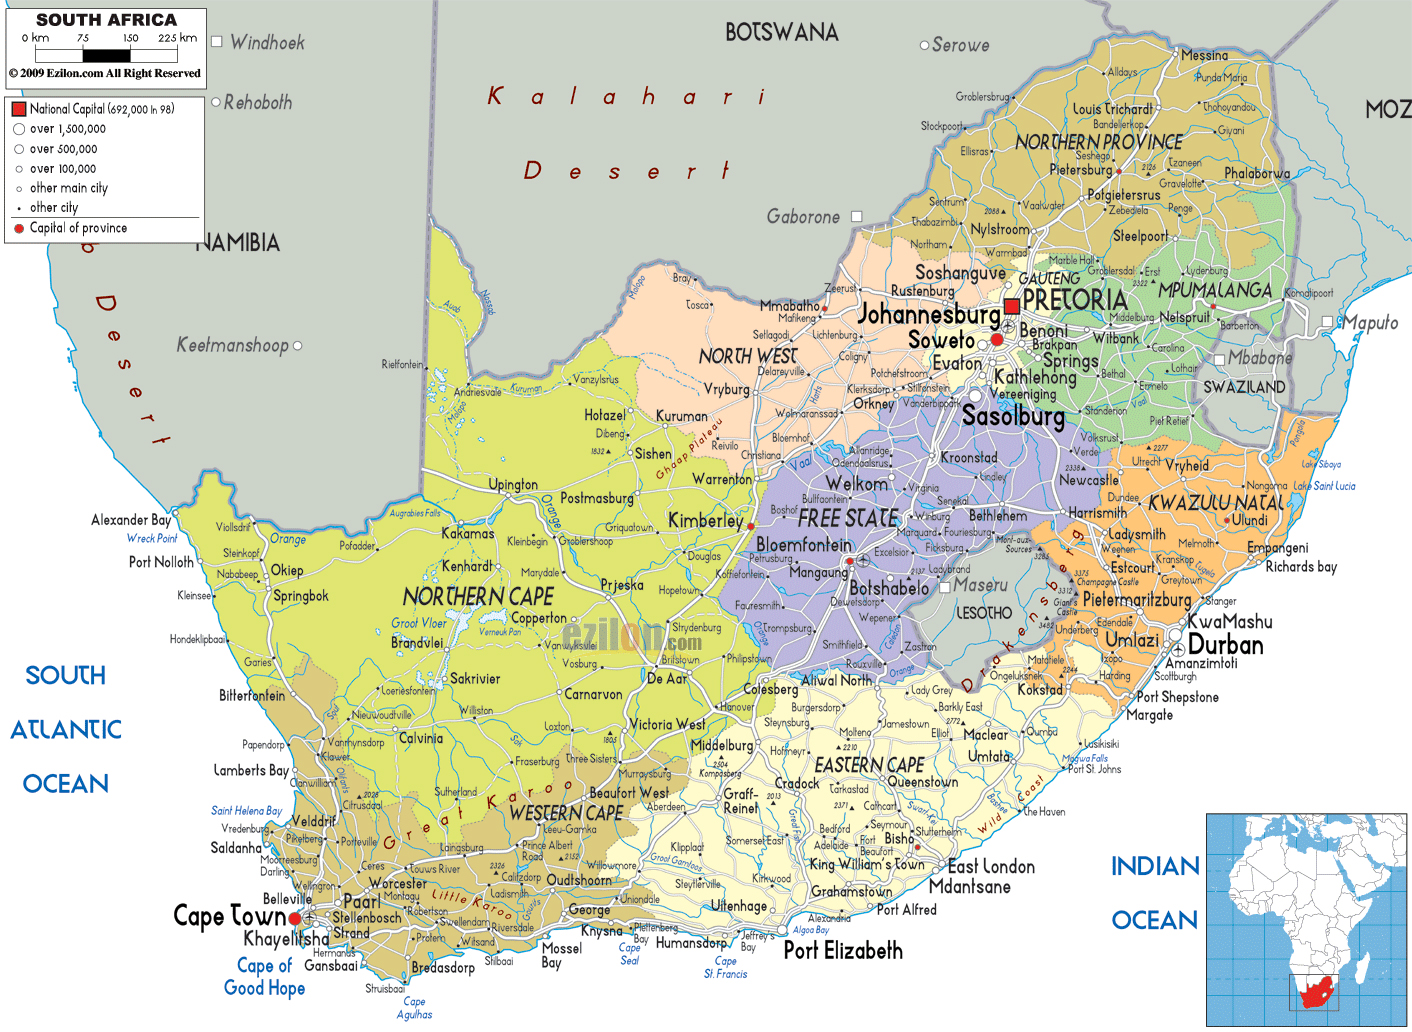 large-political-and-administrative-map-of-south-africa-with-roads